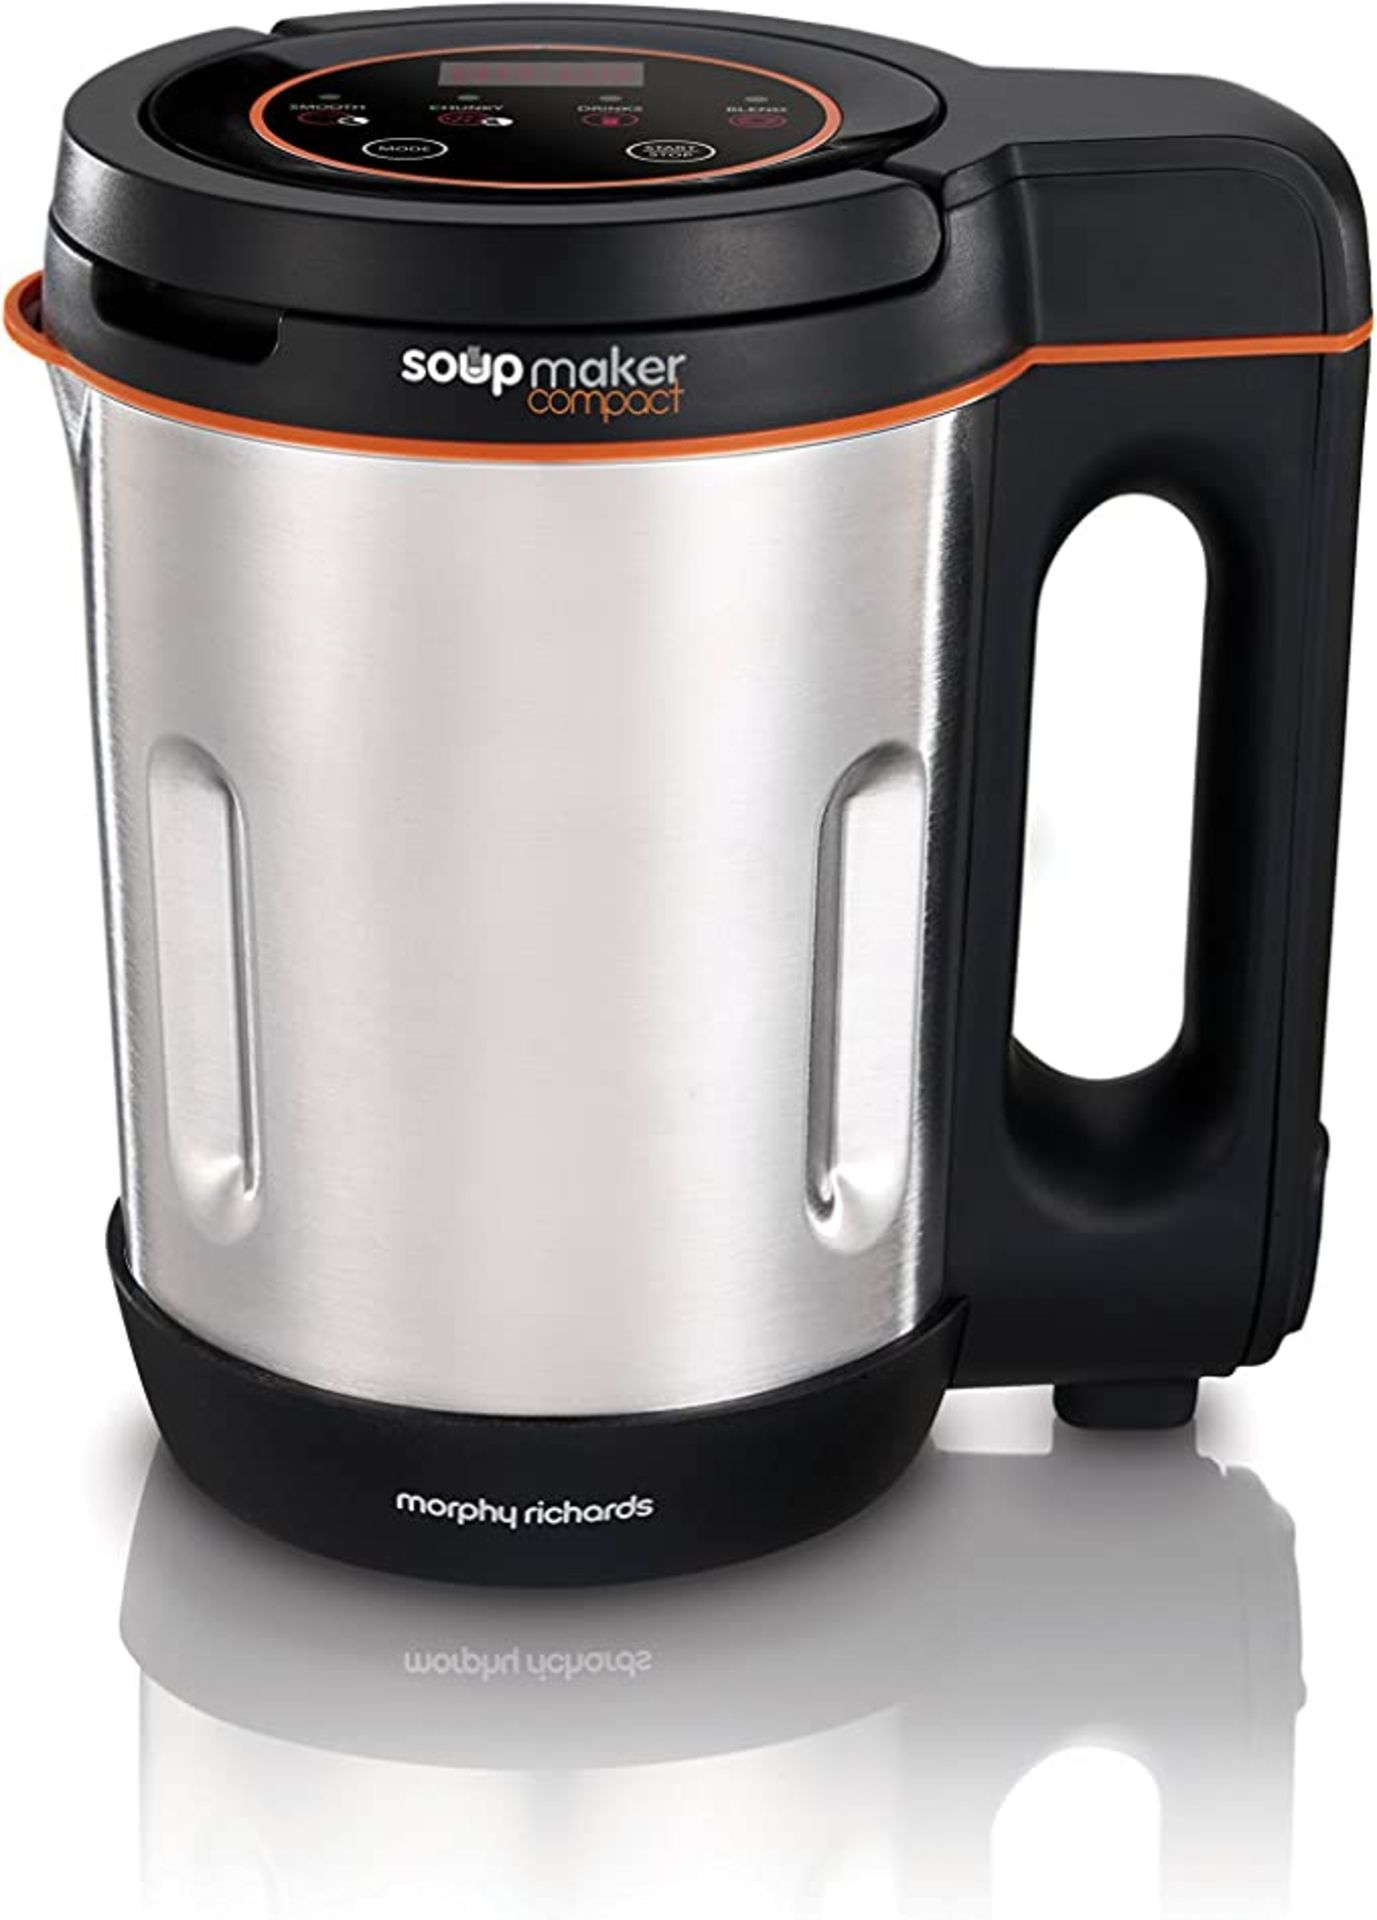 Morphy Richards Compact Soup Maker Stainless Steel 1 Litre. RRP £59.99 - GRADE U